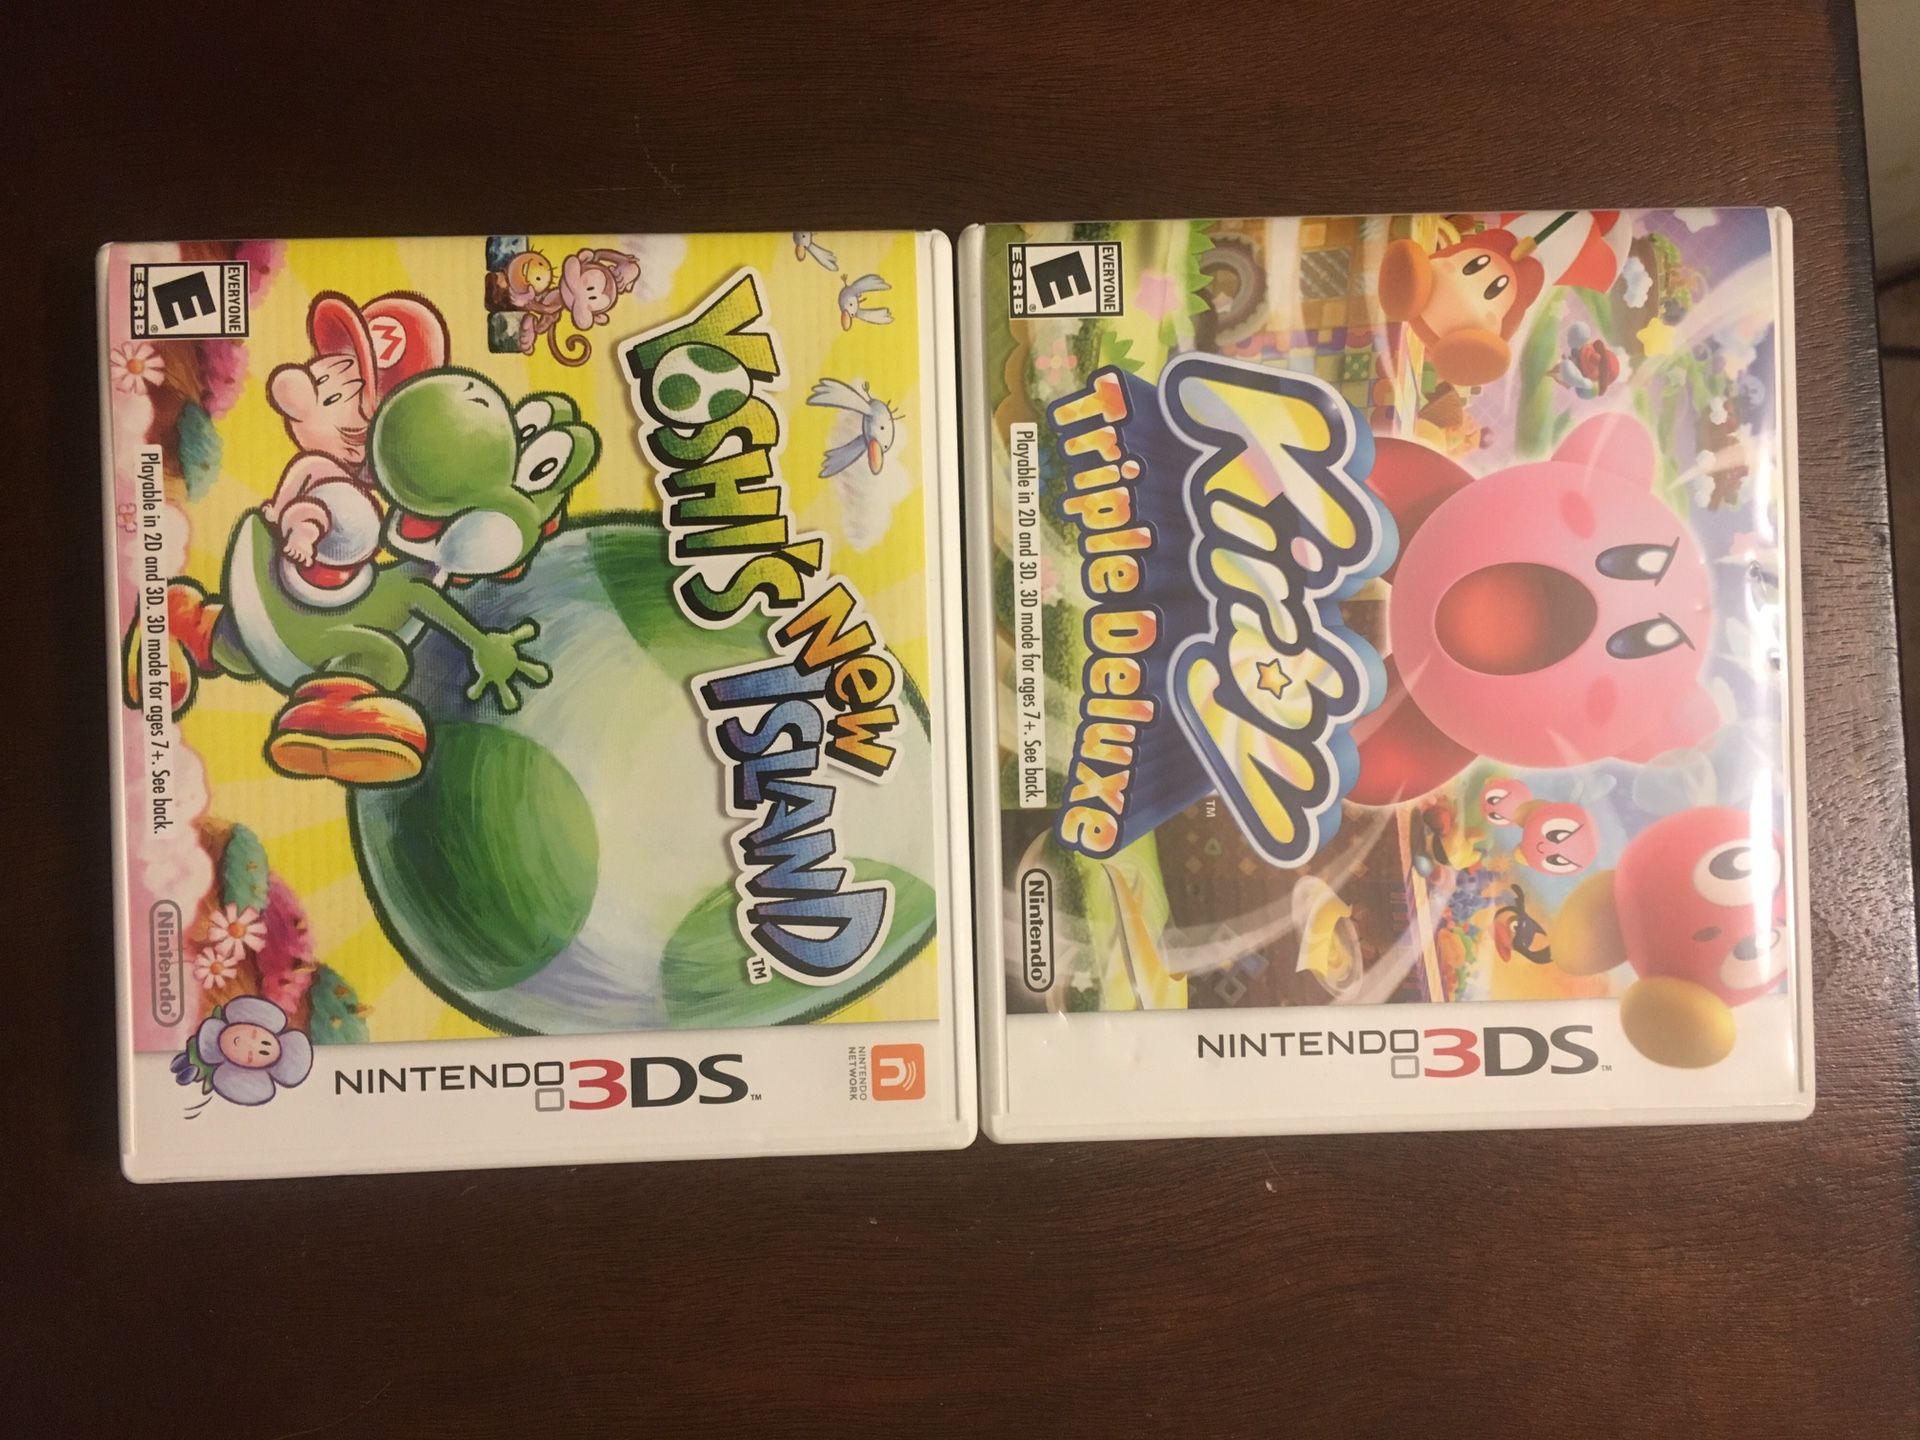 Nintendo 3ds 2x games Yoshi and Kirby lot